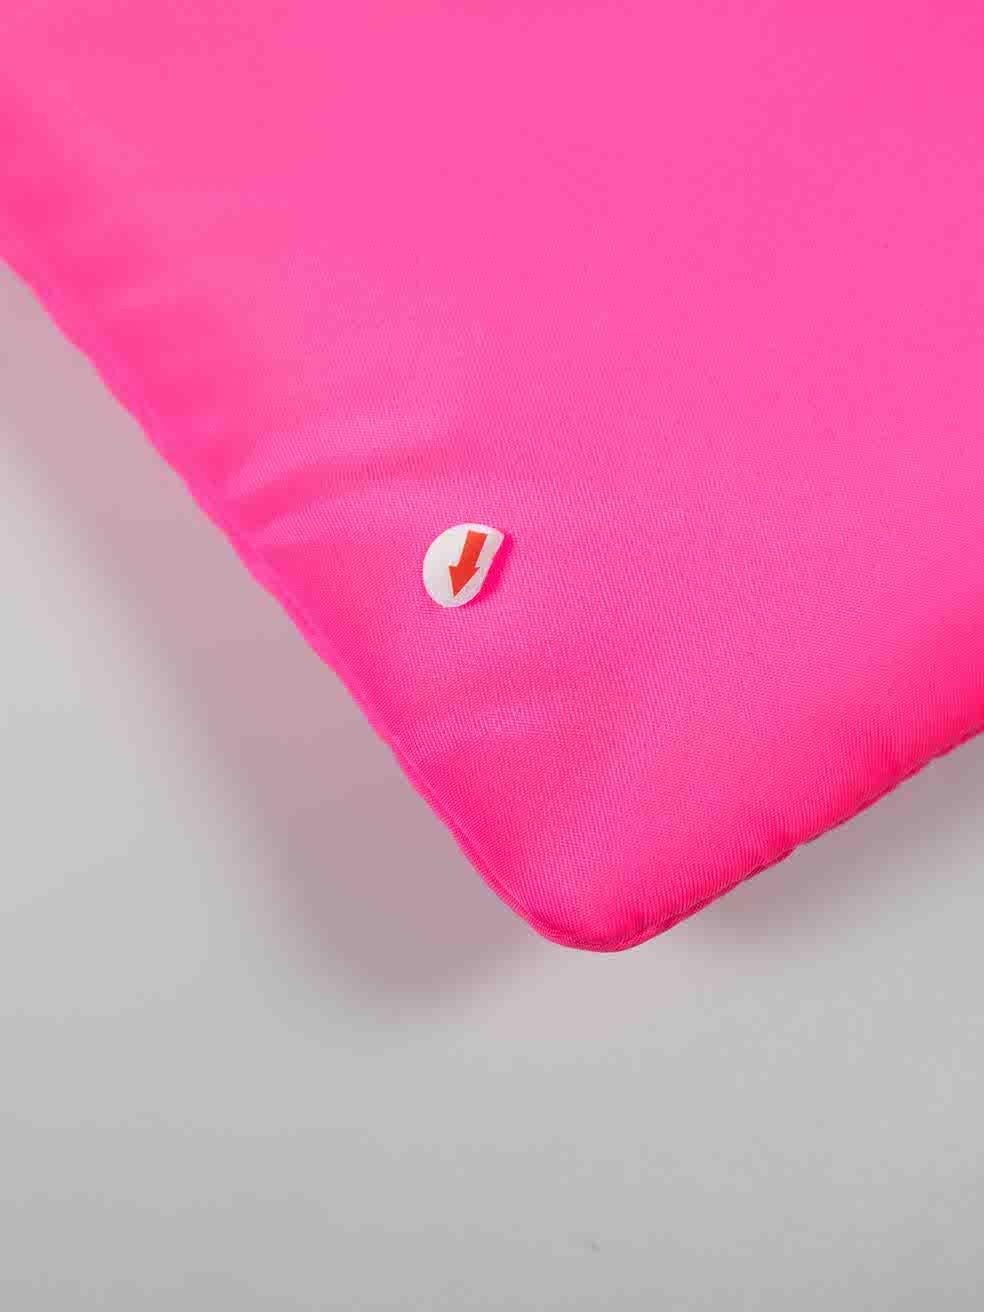 Prada Neon Pink Padded Clutch with Chain 3